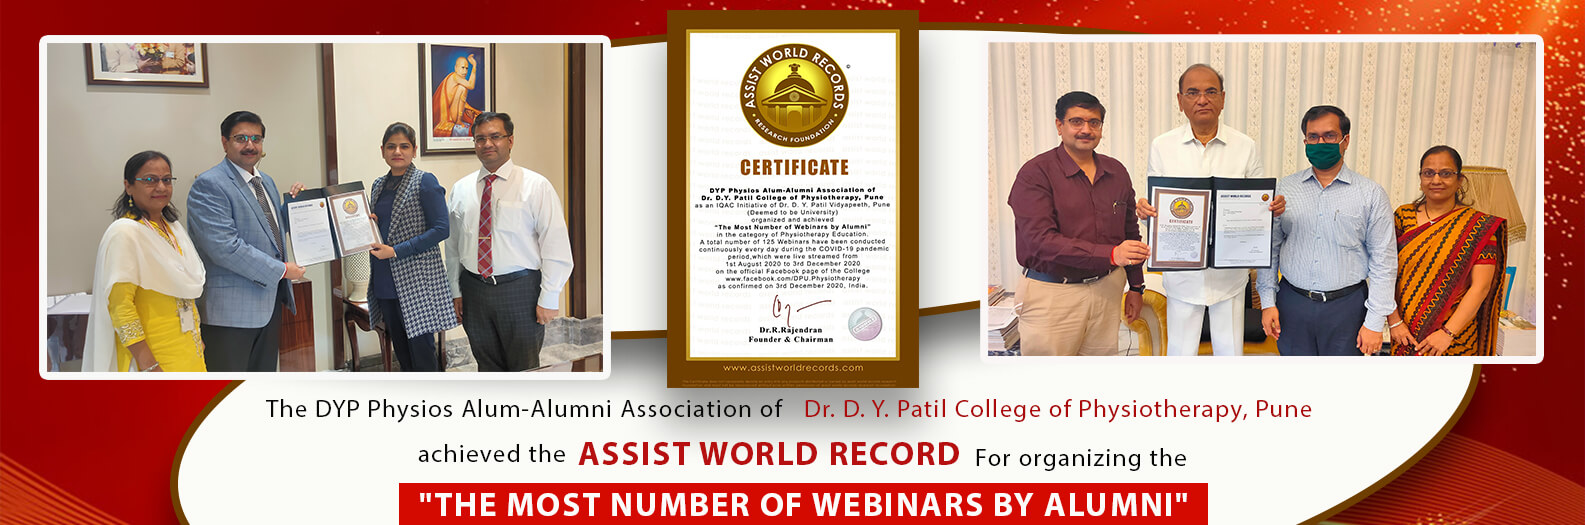 ASSIST WORLD RECORD For organizing the 'THE MOST NUMBER OF WEBINARS BY ALUMNI